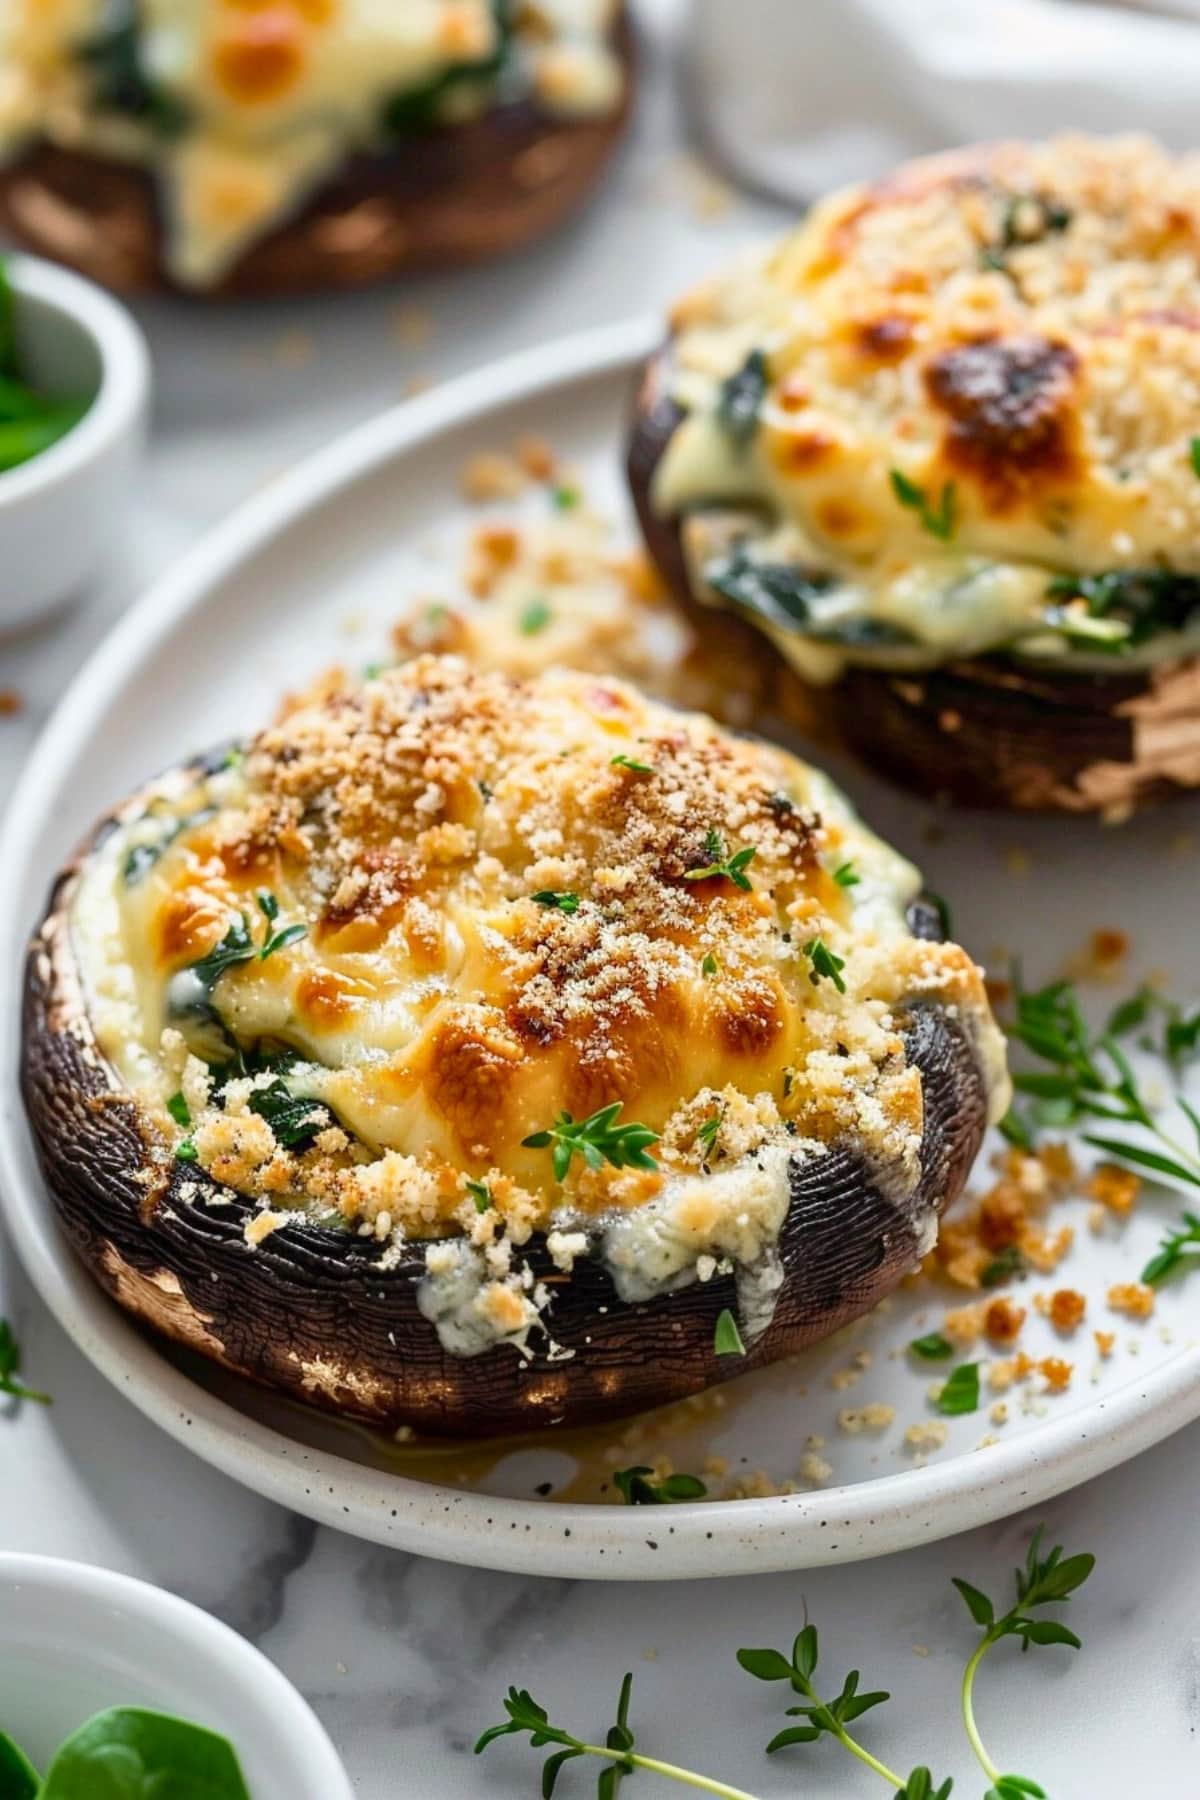 Stuffed portobello mushrooms in a plate topped with melted cheese and bread crumbs.